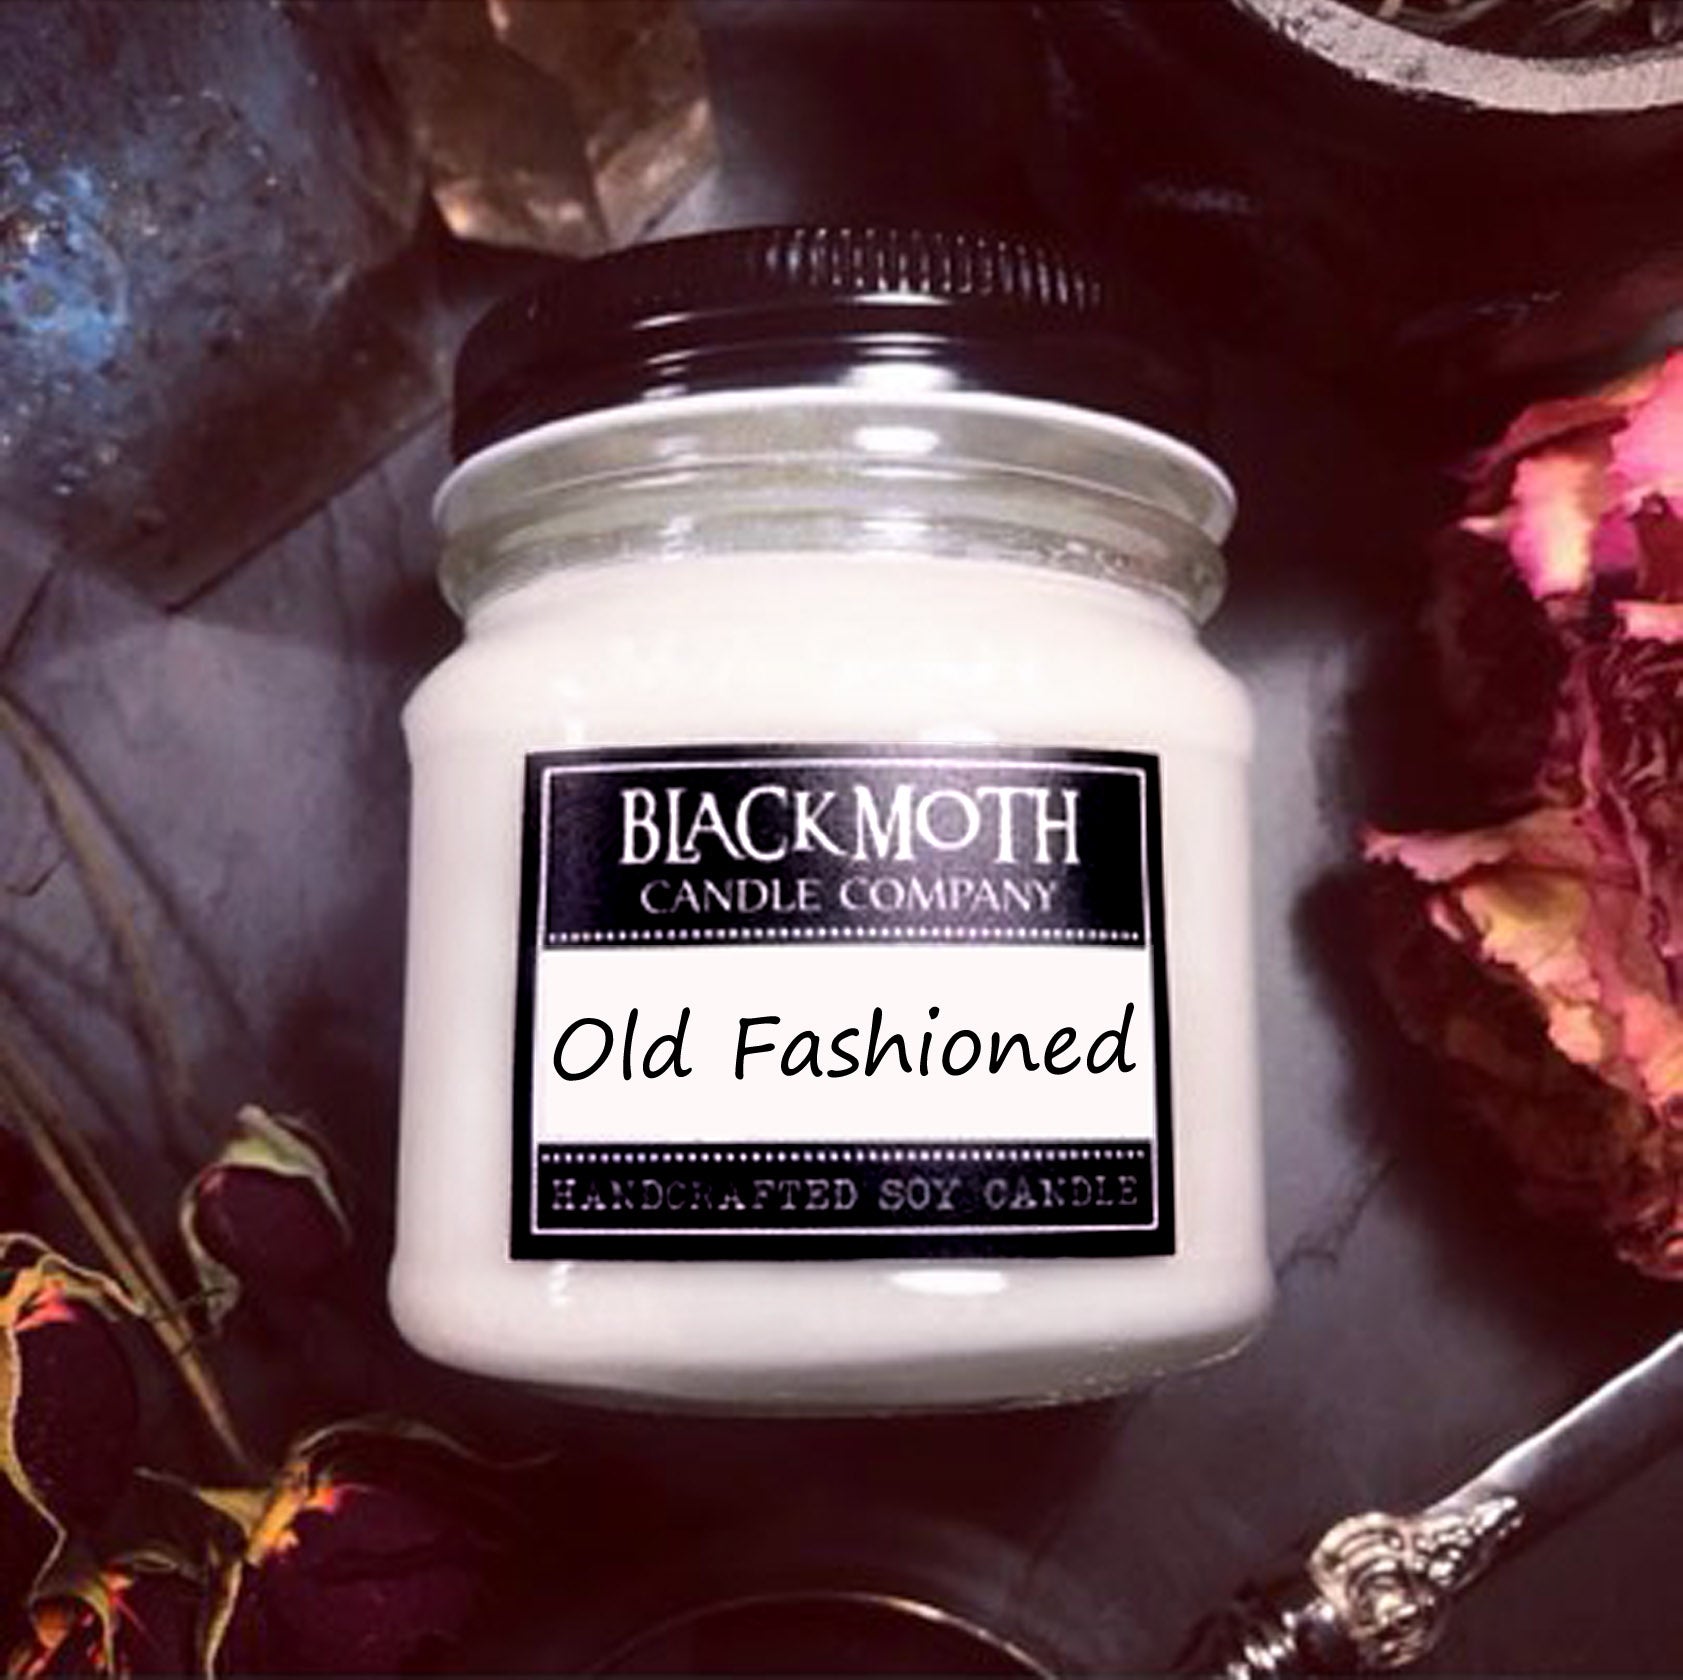 8 oz Old Fashioned Scented Soy Candle in Mason Jar